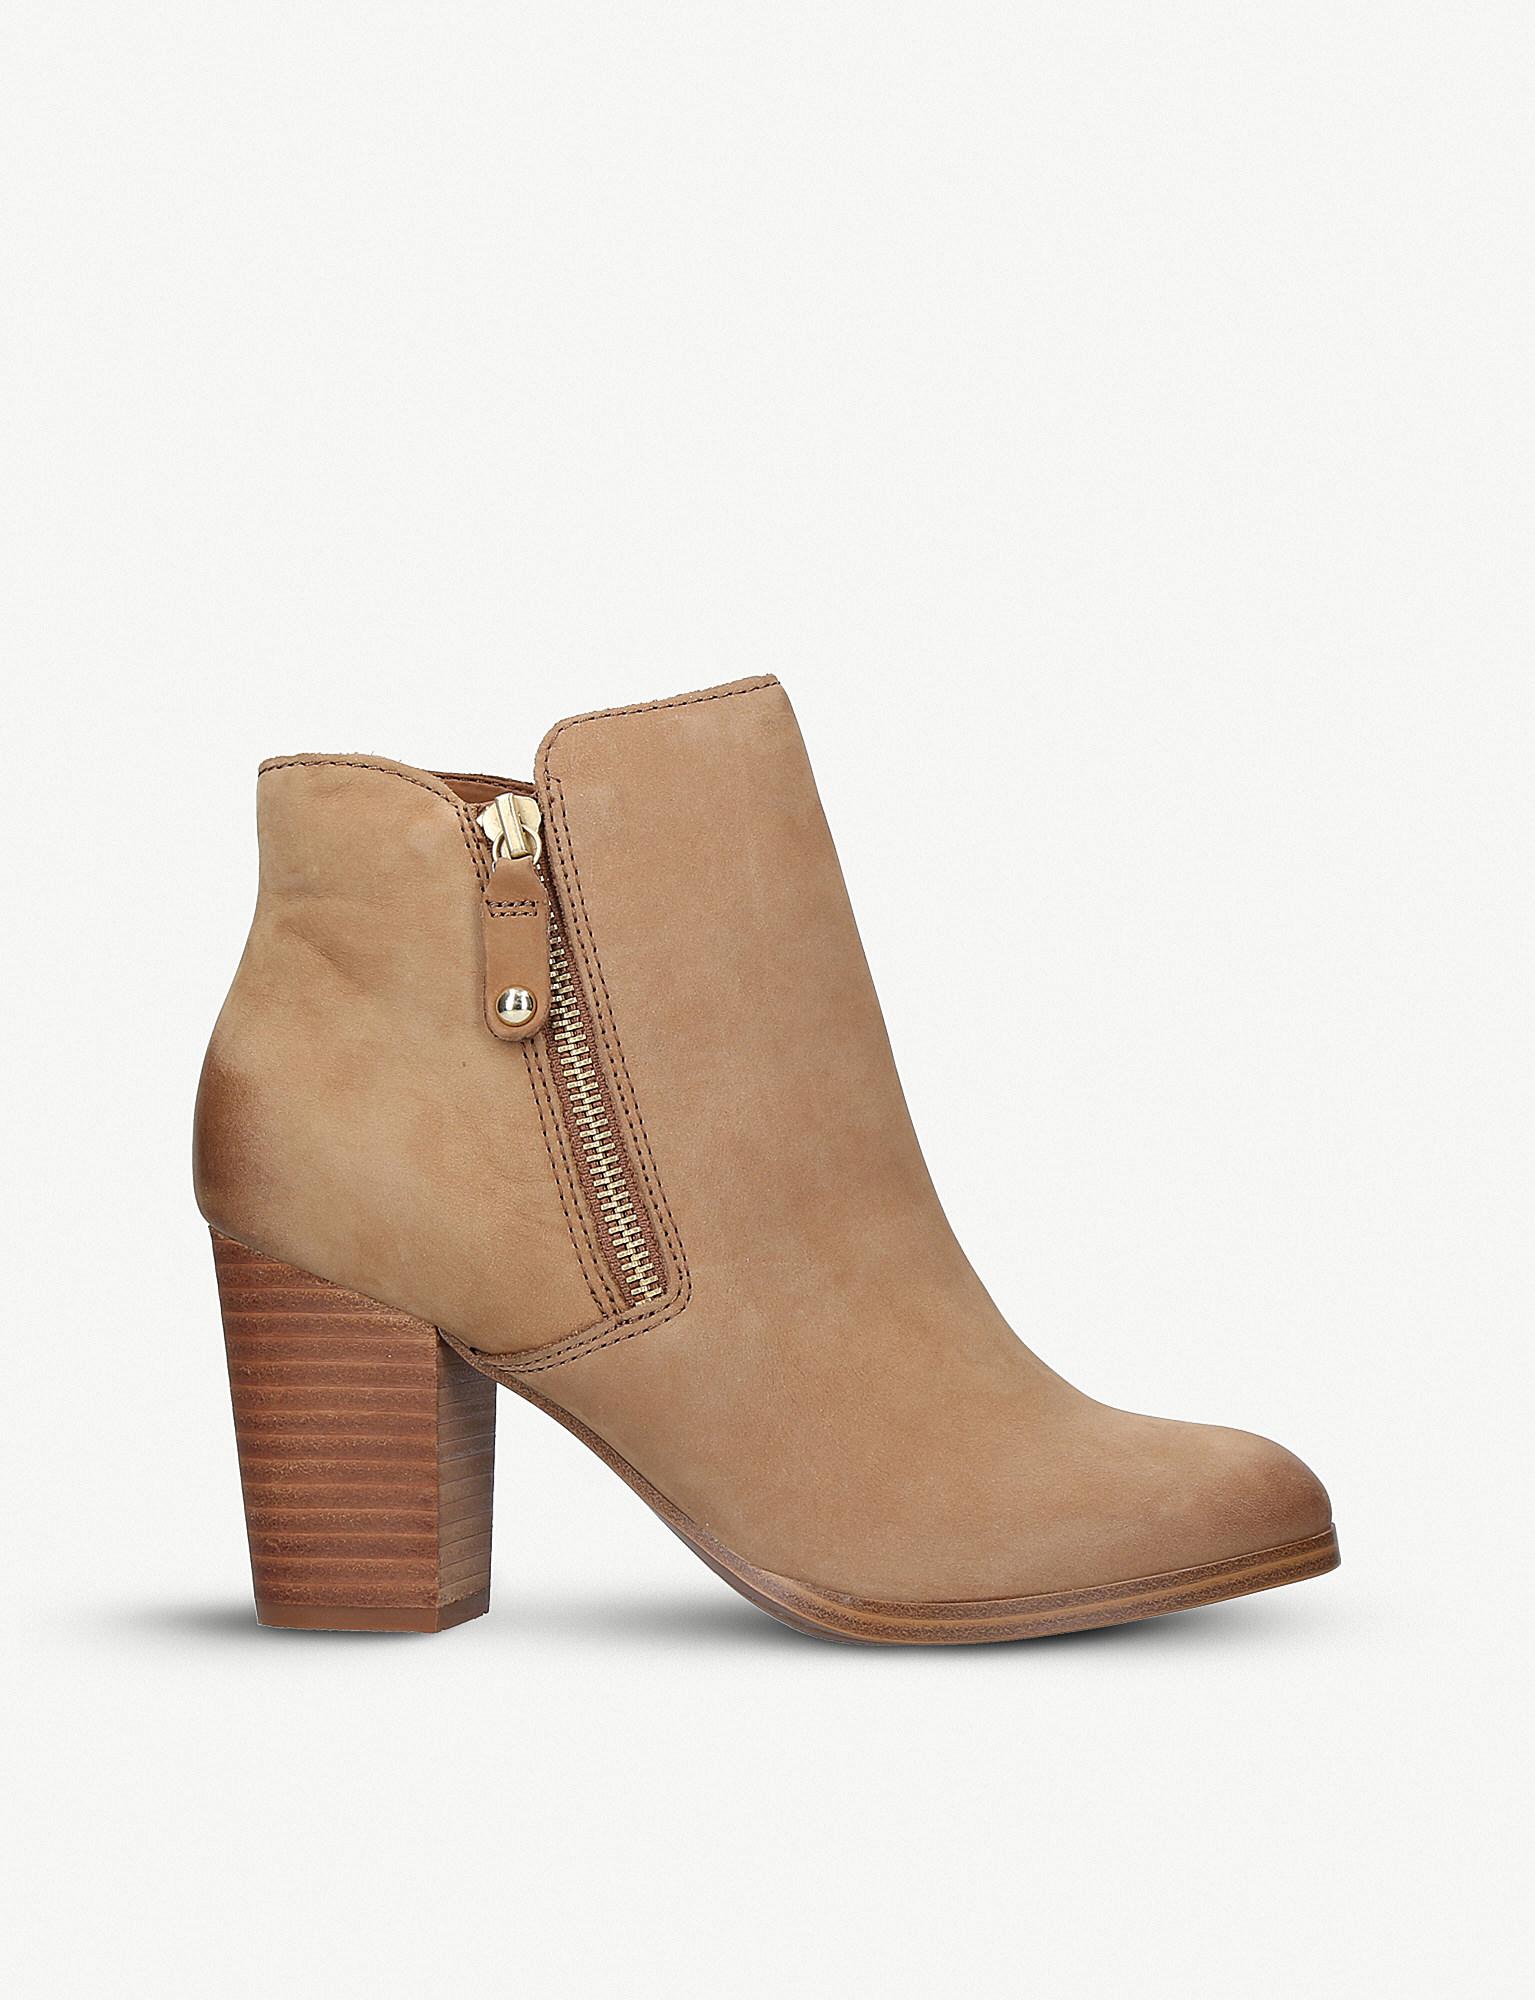 Lover Udholdenhed pendul ALDO Naedia Leather Ankle Boots in Brown | Lyst